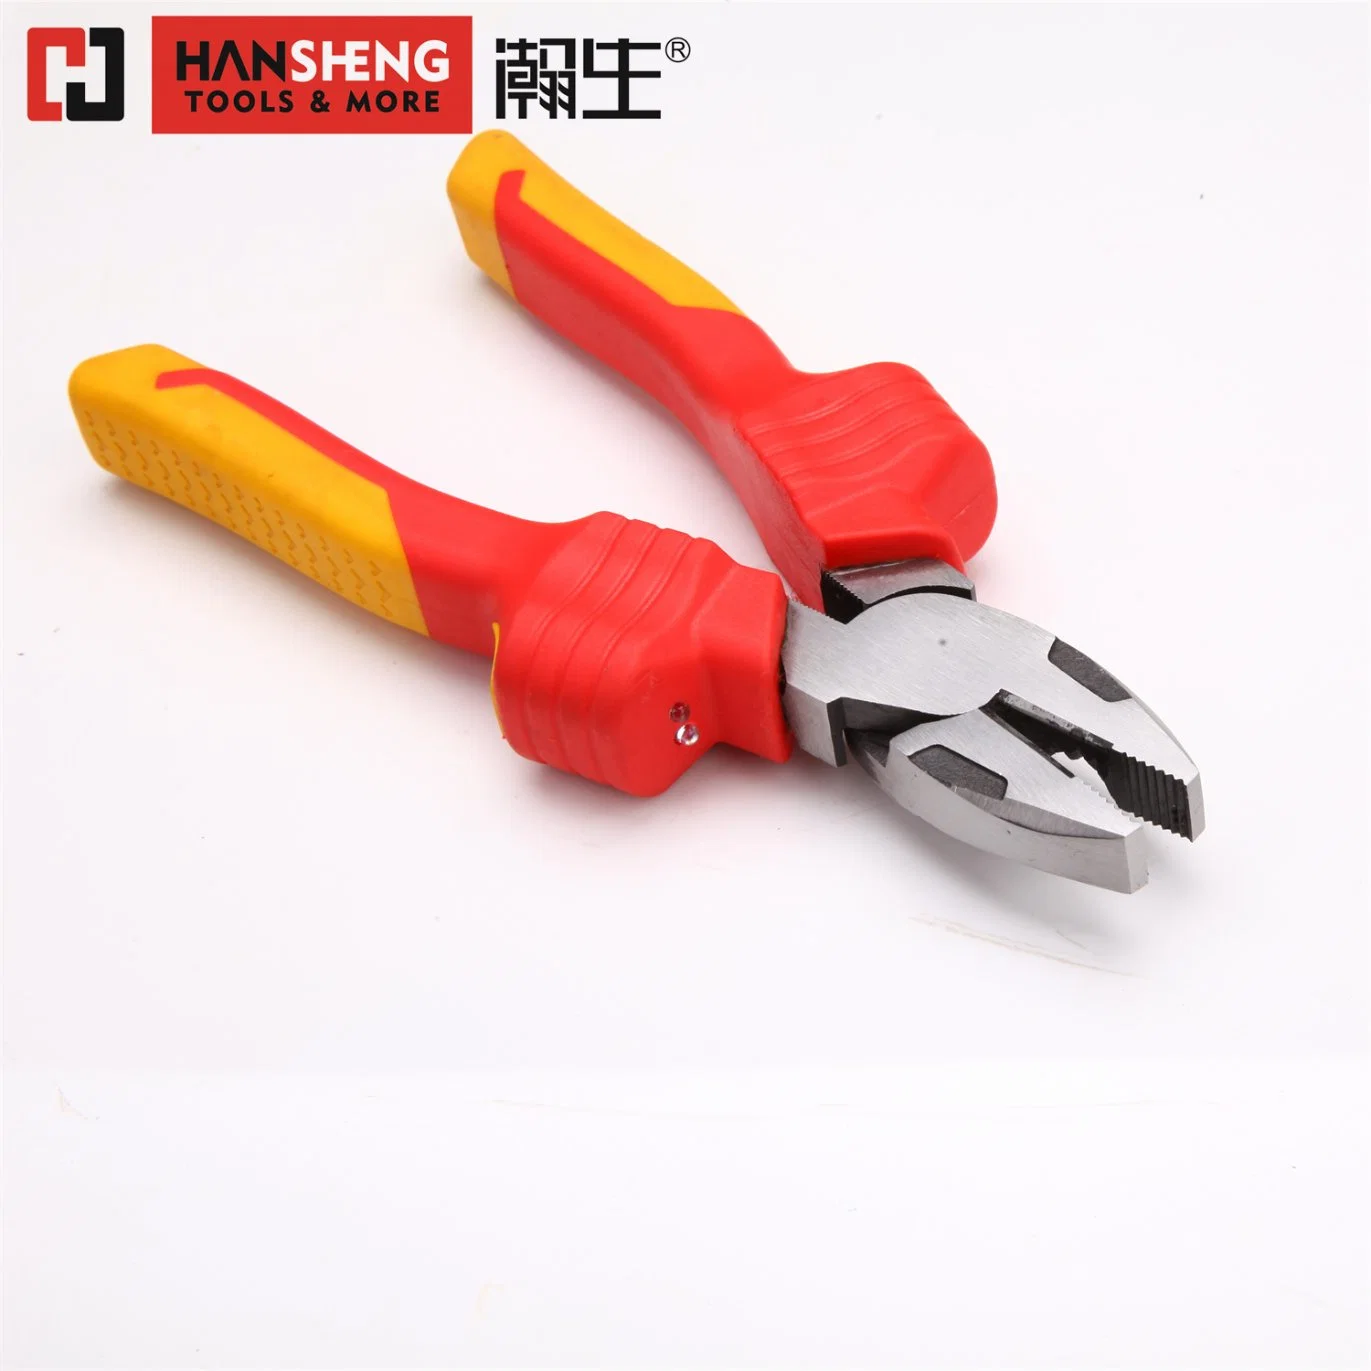 VDE Combination Pliers, with 1000V Dipped Handle, Cutting Tools, Professional Hand Tool, Hardware Tool, Insulating Tool, Insulated Tool